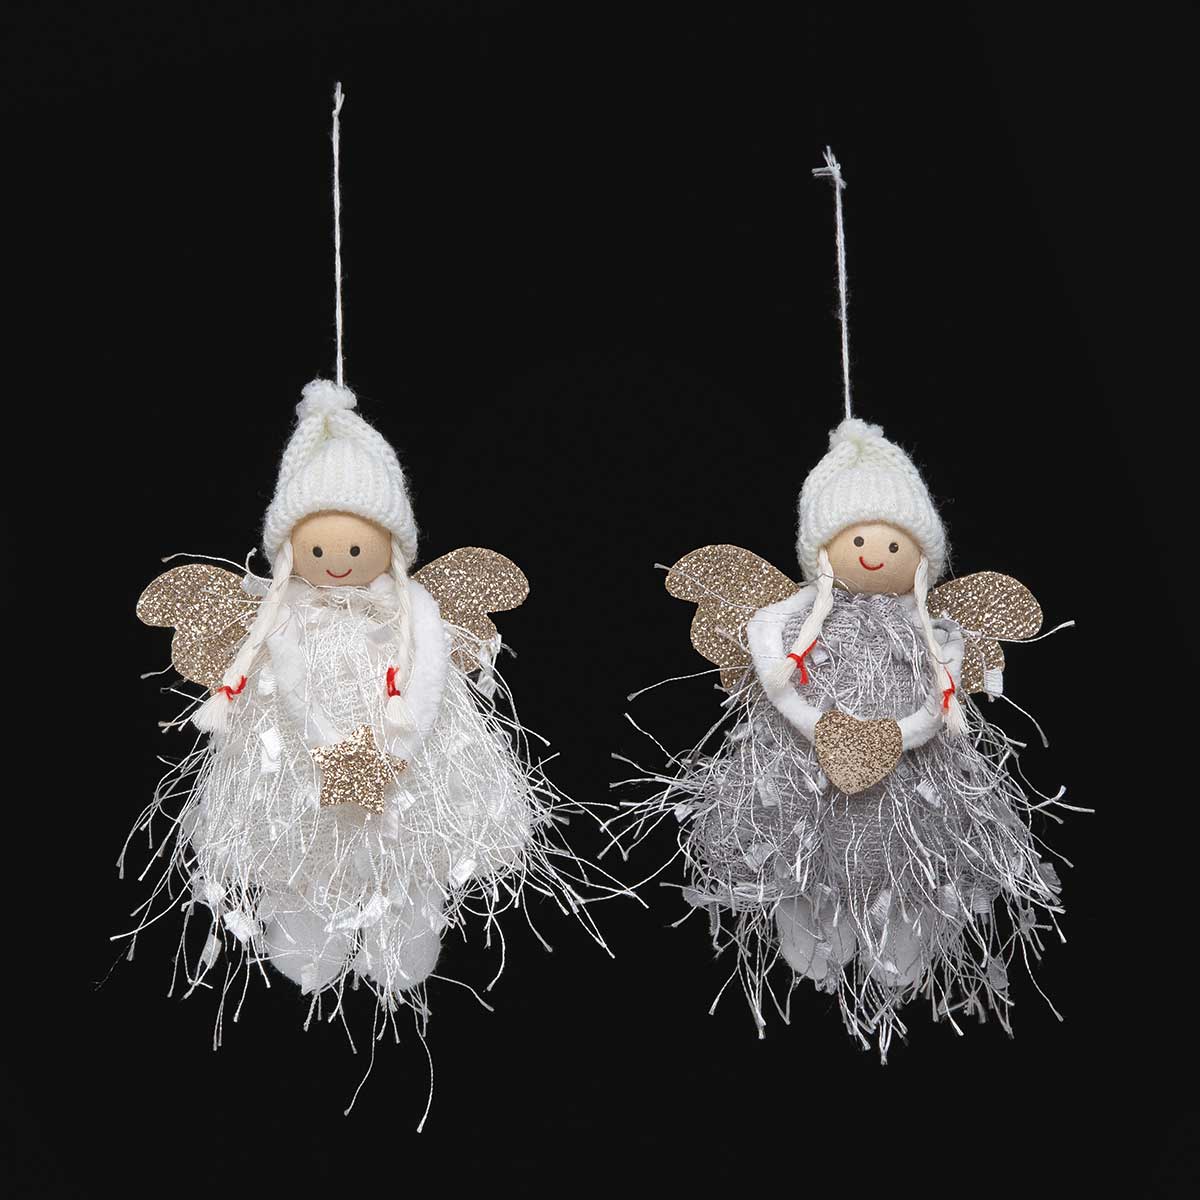 ORNAMENT ANGEL 2 ASSORTED 3.25IN X 1.5IN X 4.5IN WHITE/GREY